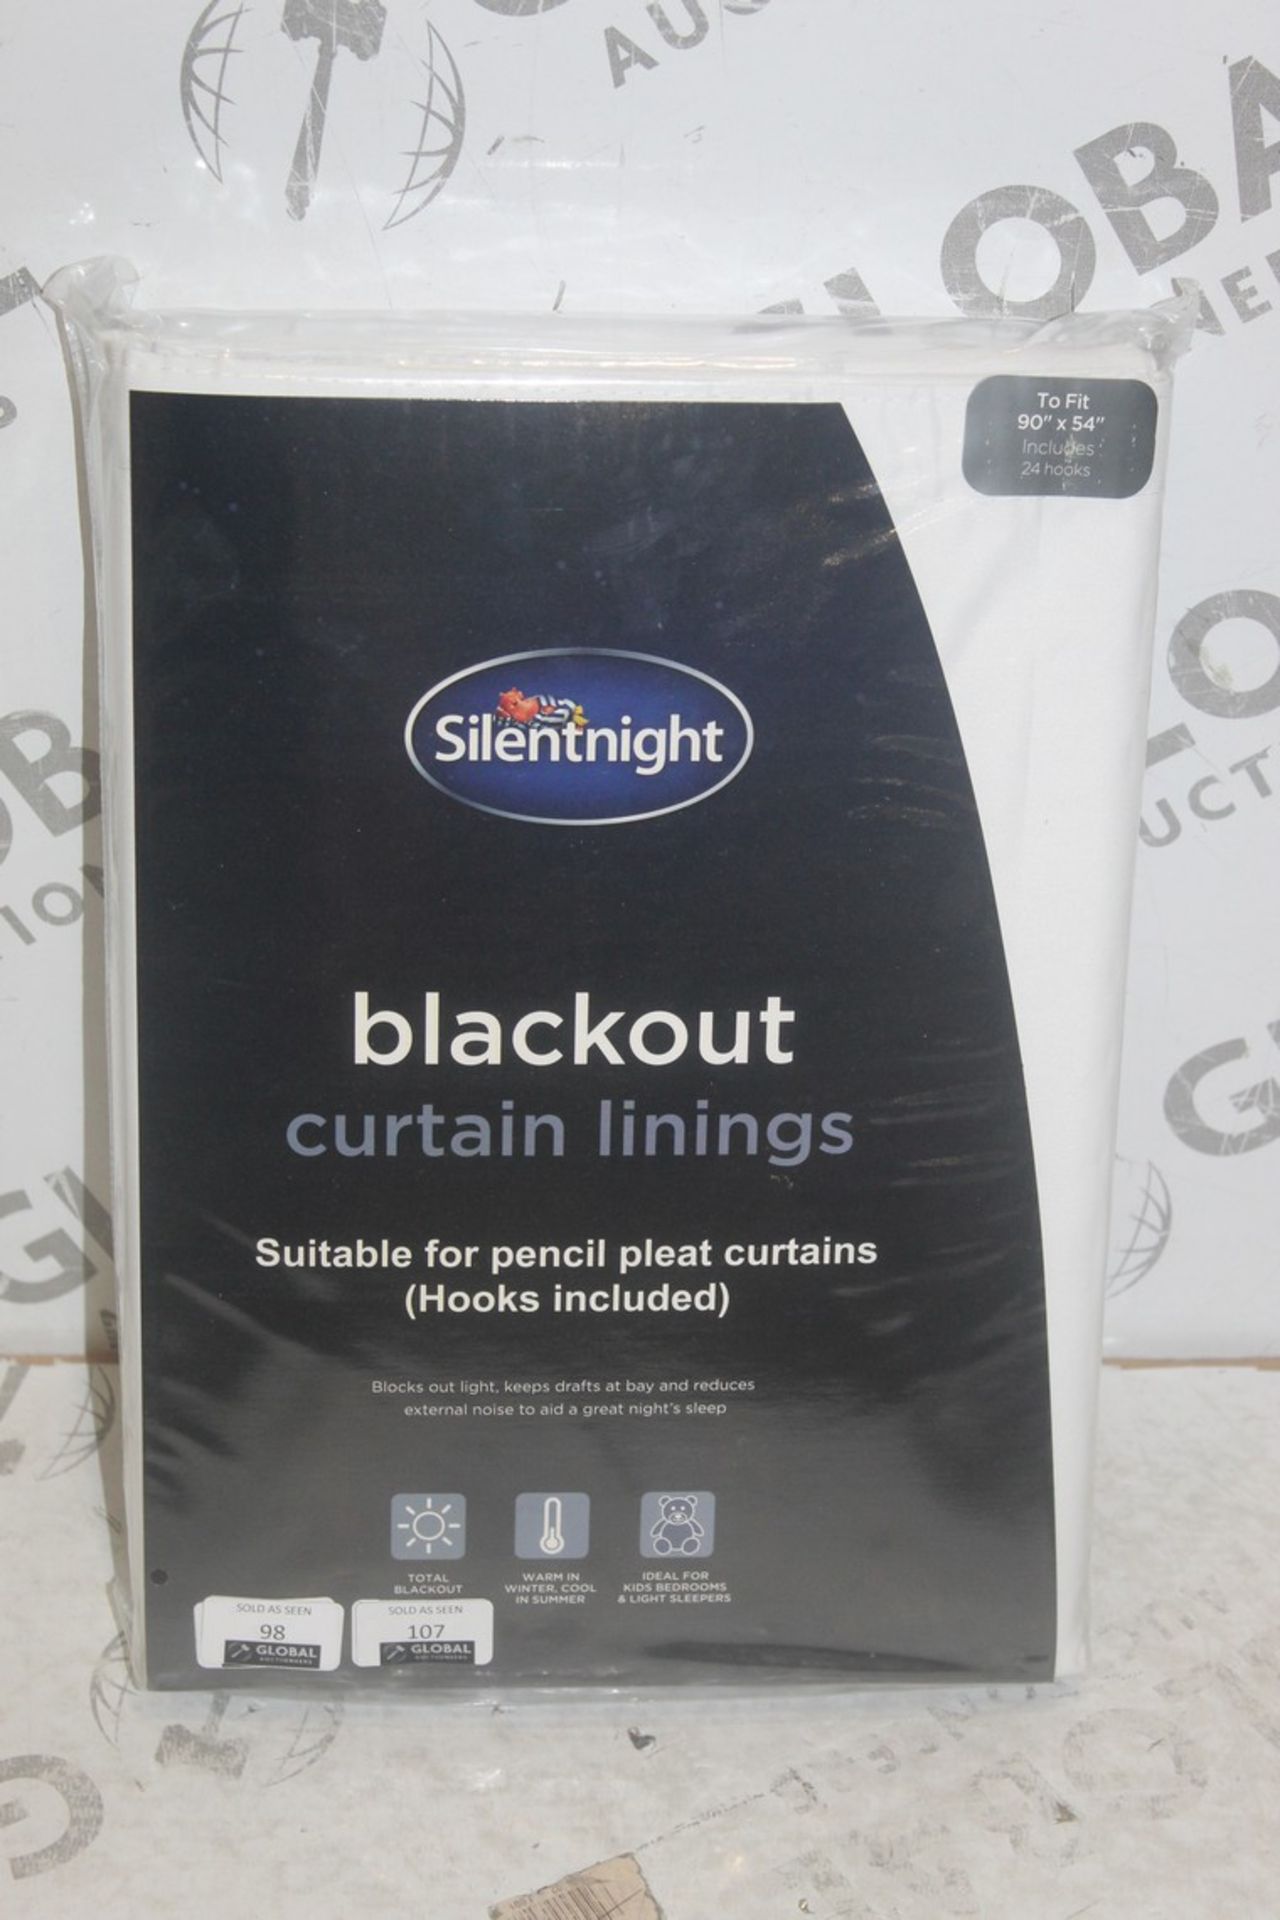 Brand New Pair Size 90 x 54" Silent Night Blackout Curtain Linings RRP £110 (Pictures Are For